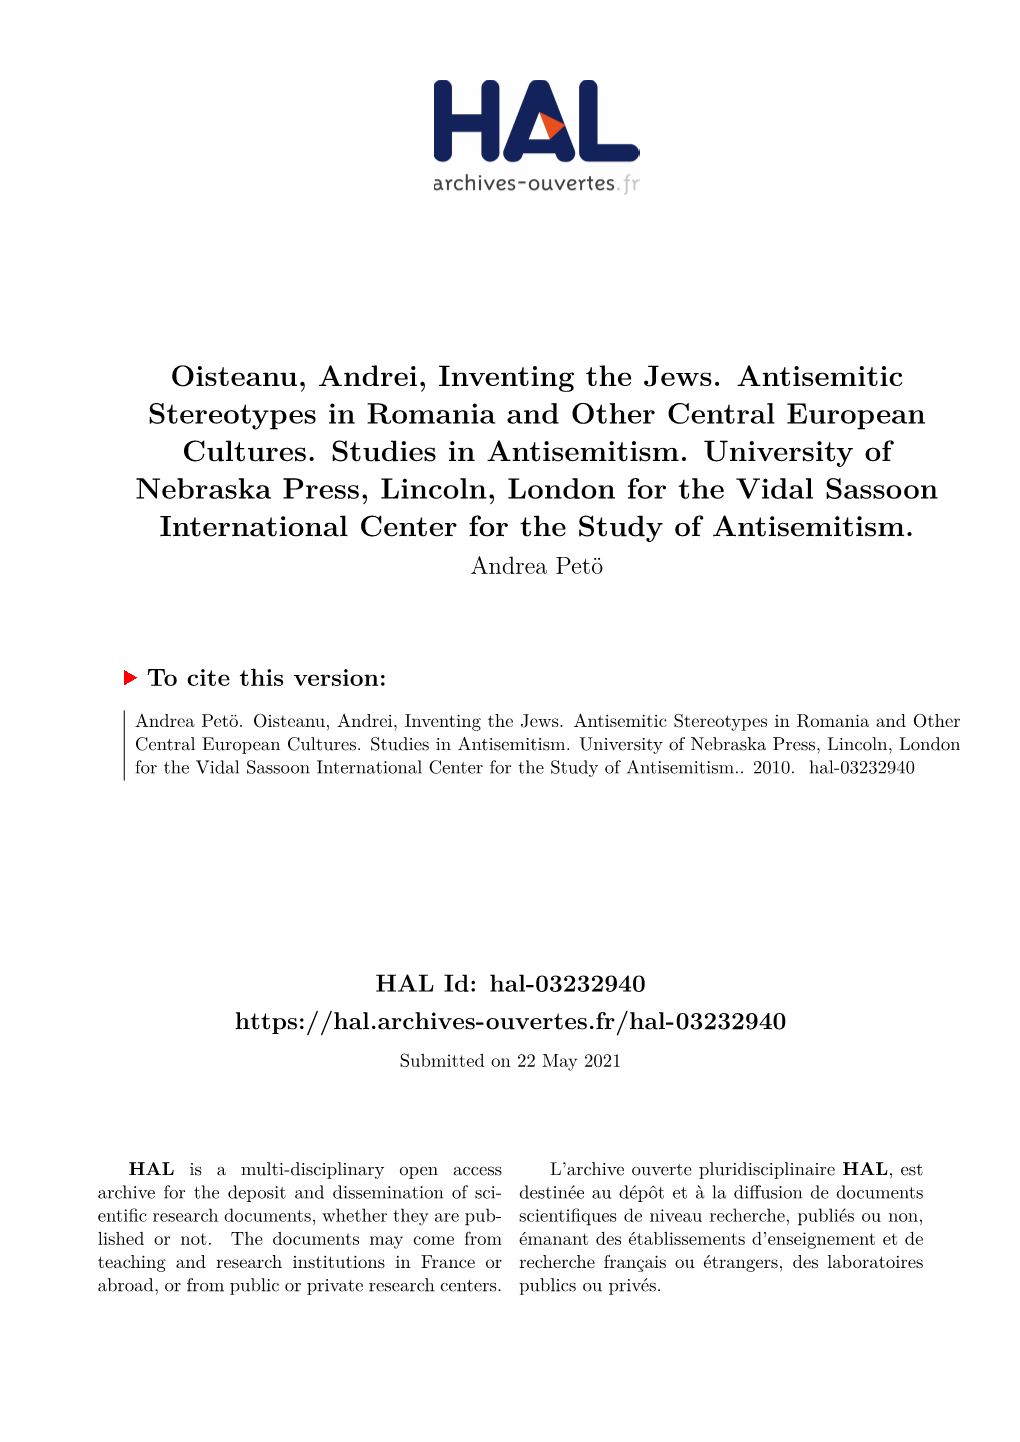 Oisteanu, Andrei, Inventing the Jews. Antisemitic Stereotypes in Romania and Other Central European Cultures